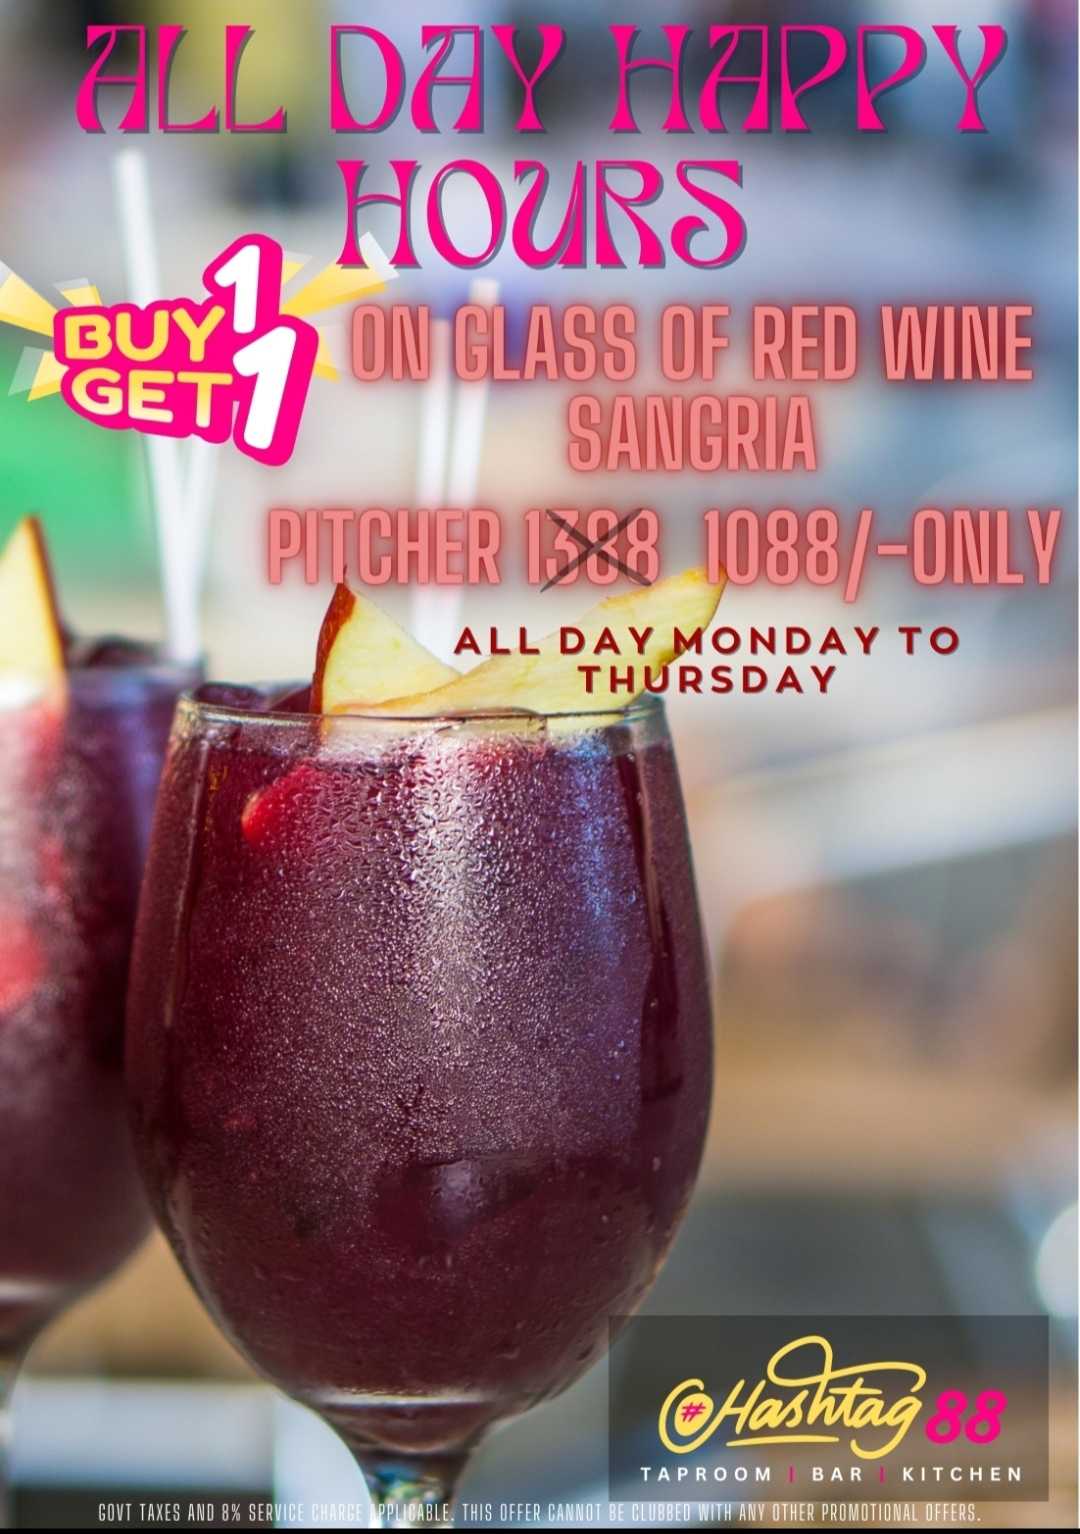 Buy 1 Get 1 On Glass of Red Wine Sangaria Pitcher